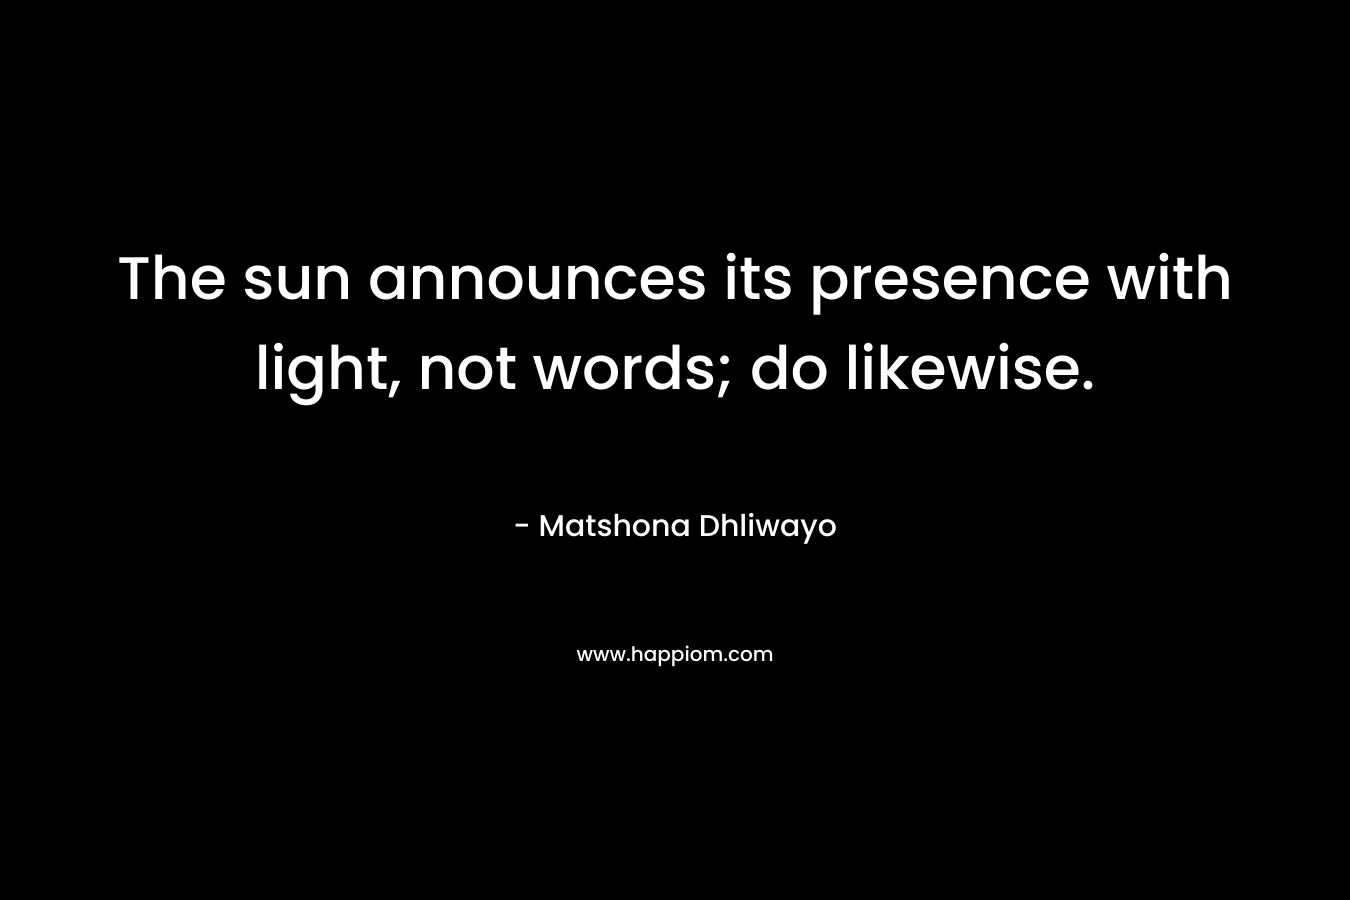 The sun announces its presence with light, not words; do likewise.